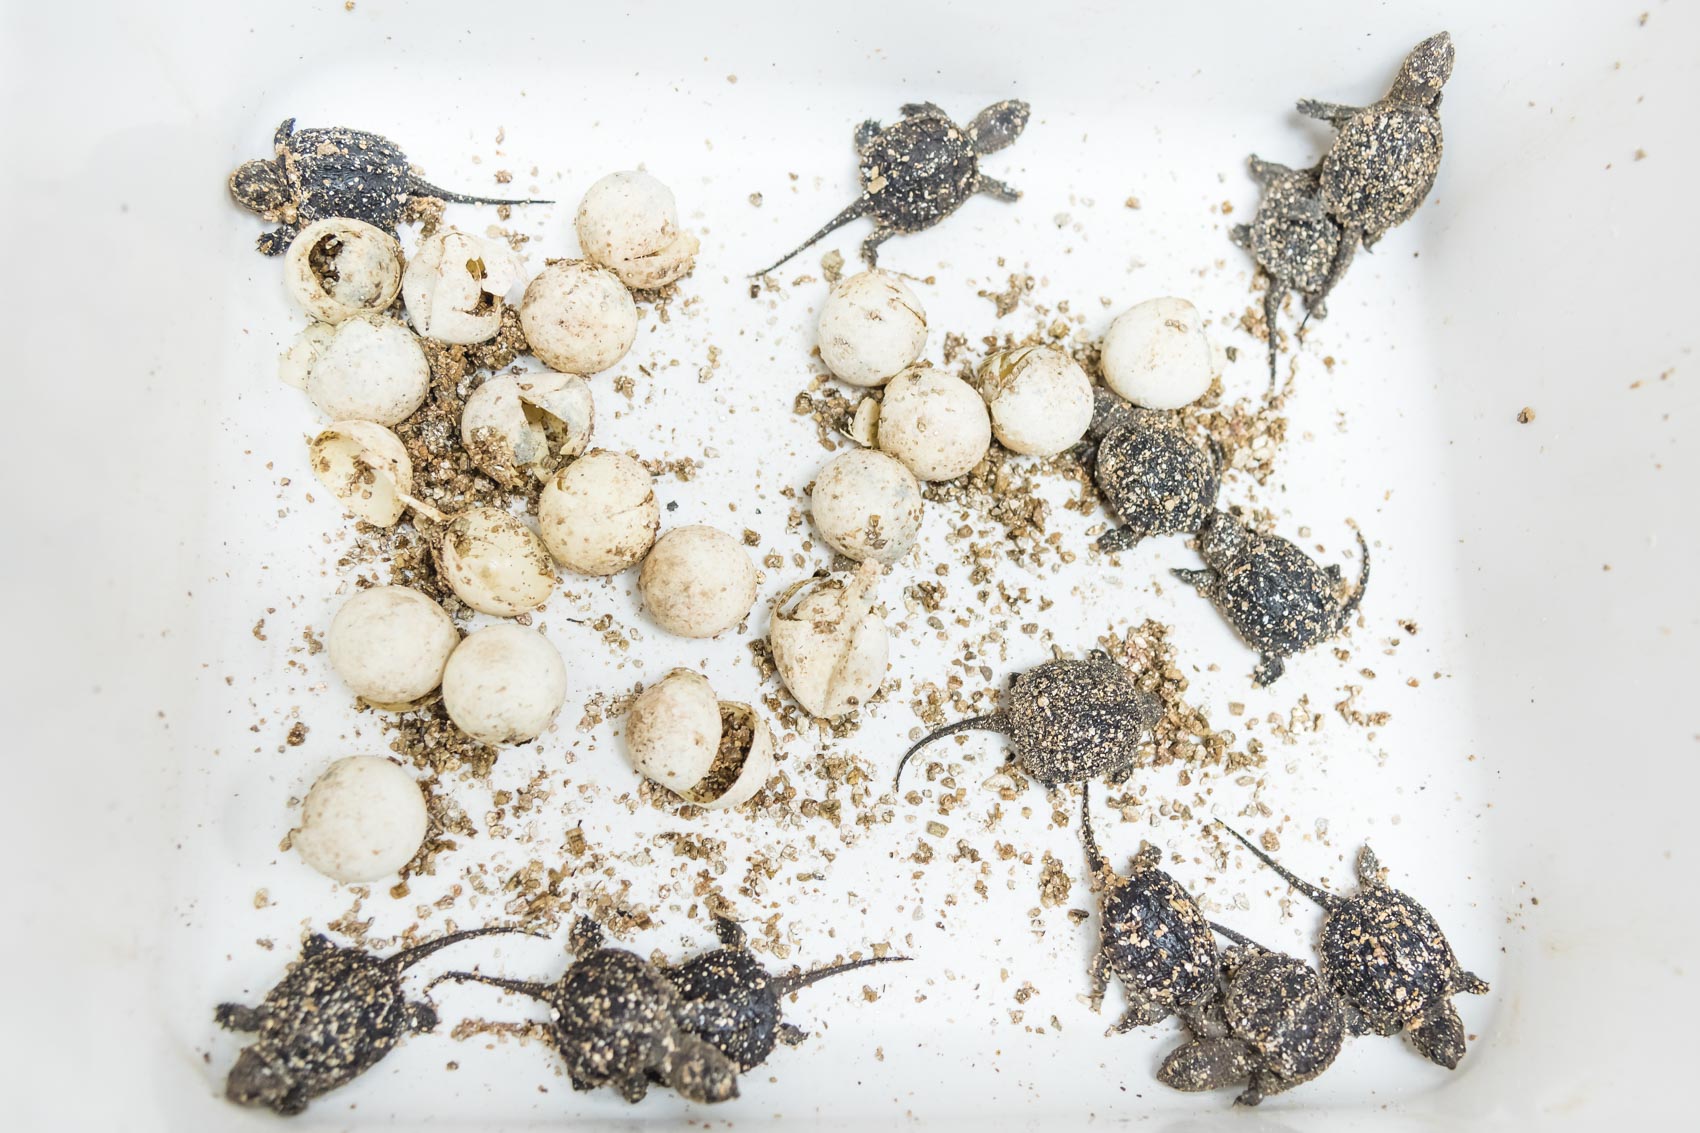 A tub full of baby spiny softshell turtles recently hatched from their eggs at a lab at the UTRCA